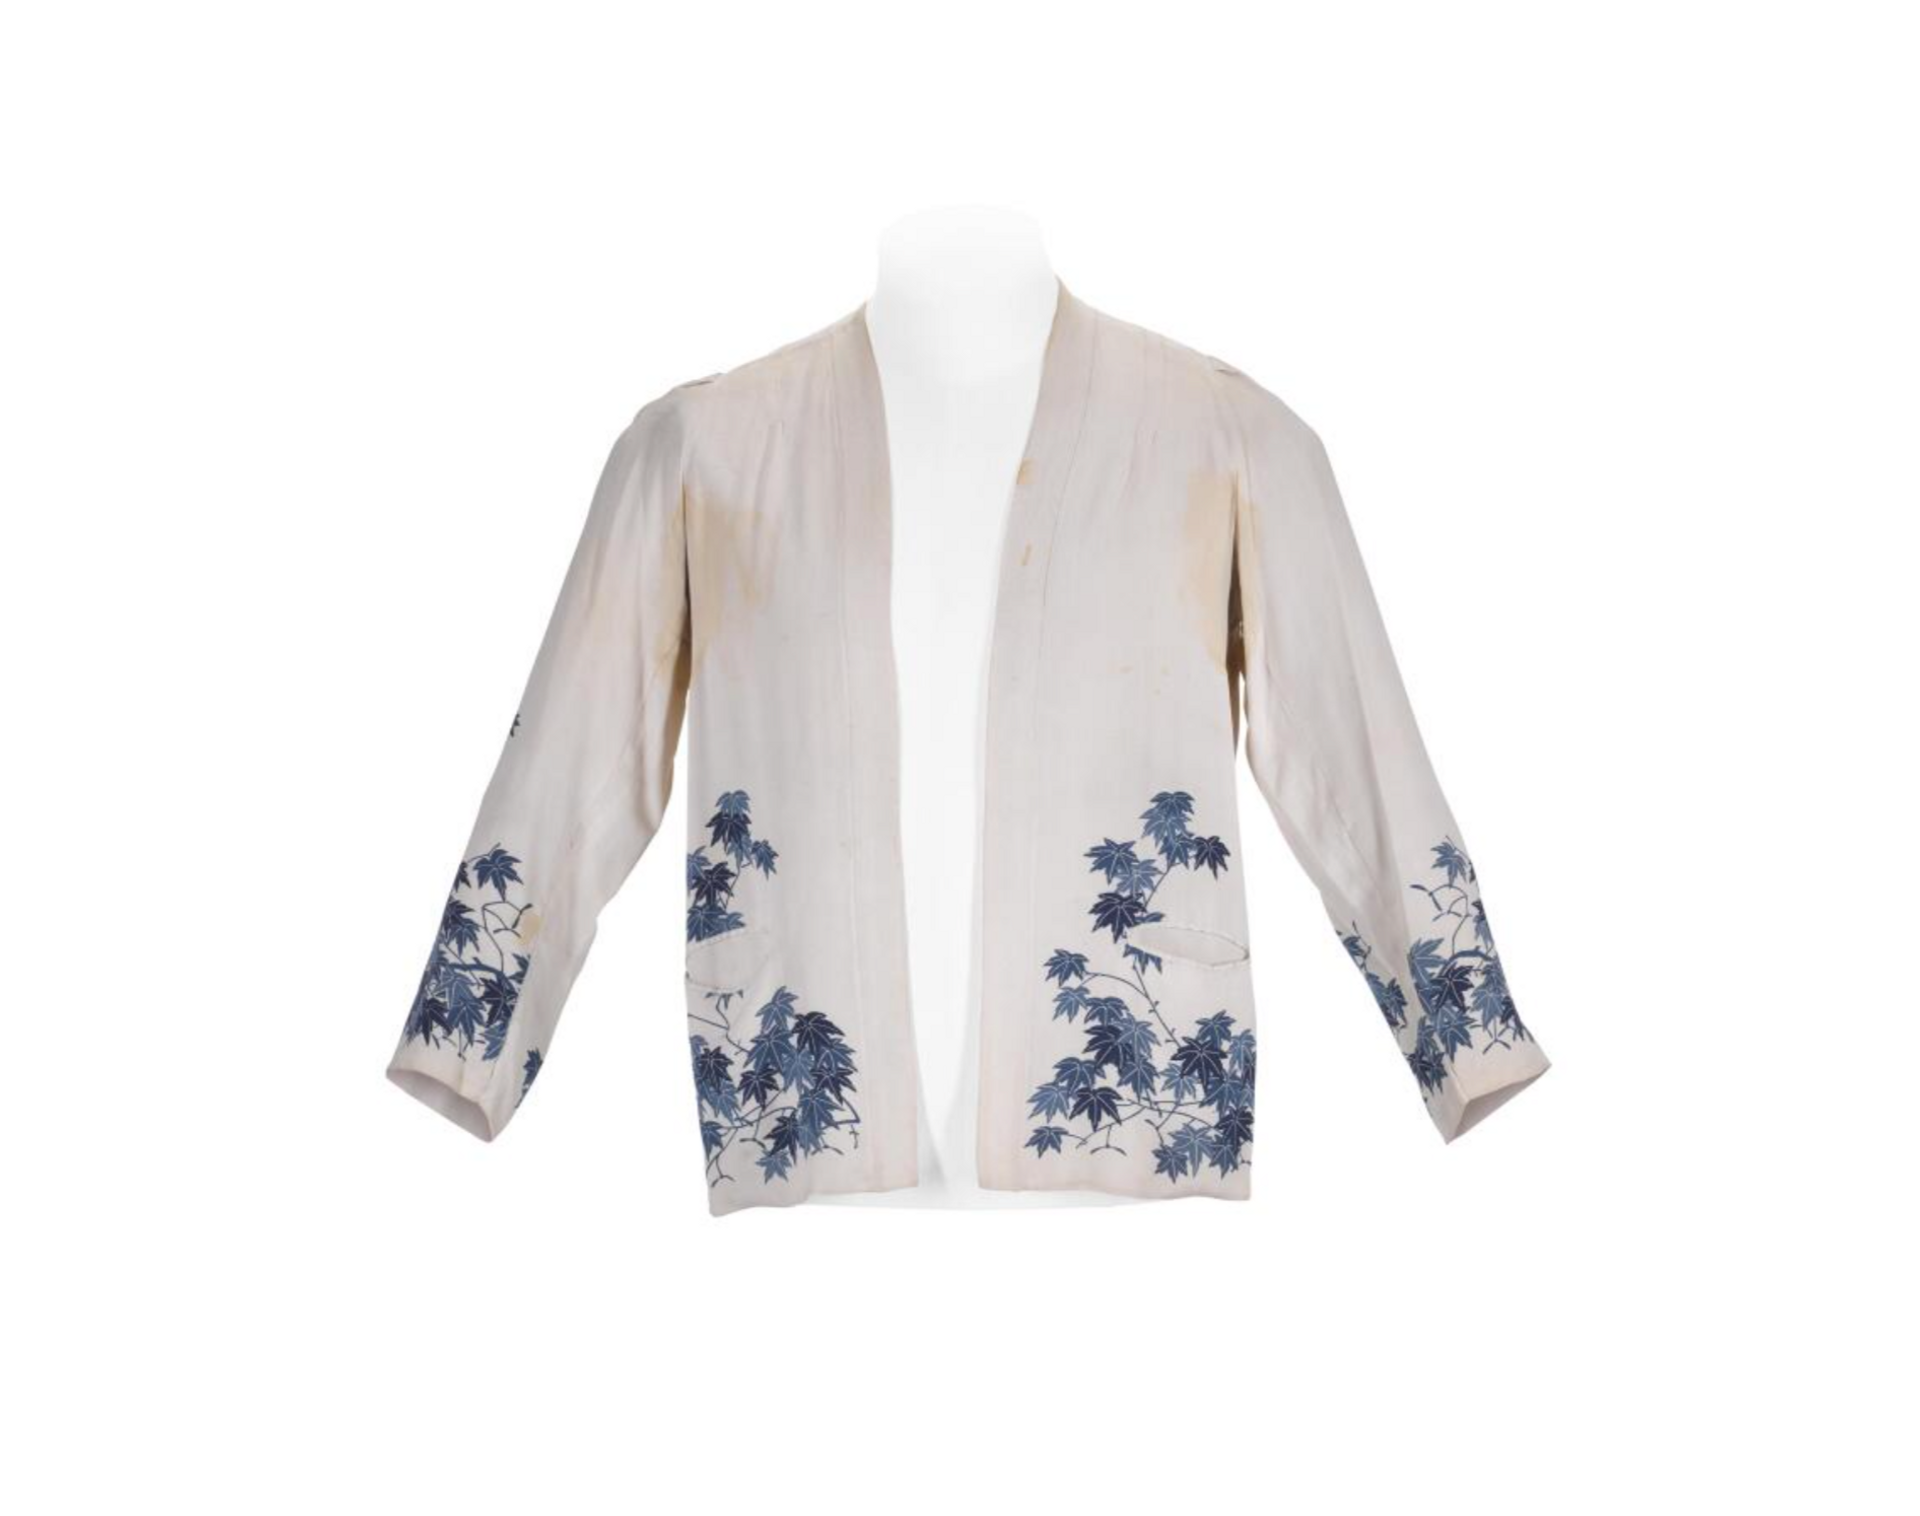 An image of a white kimono-style jacket, with blue detailing, owned by Freddie Mercury.